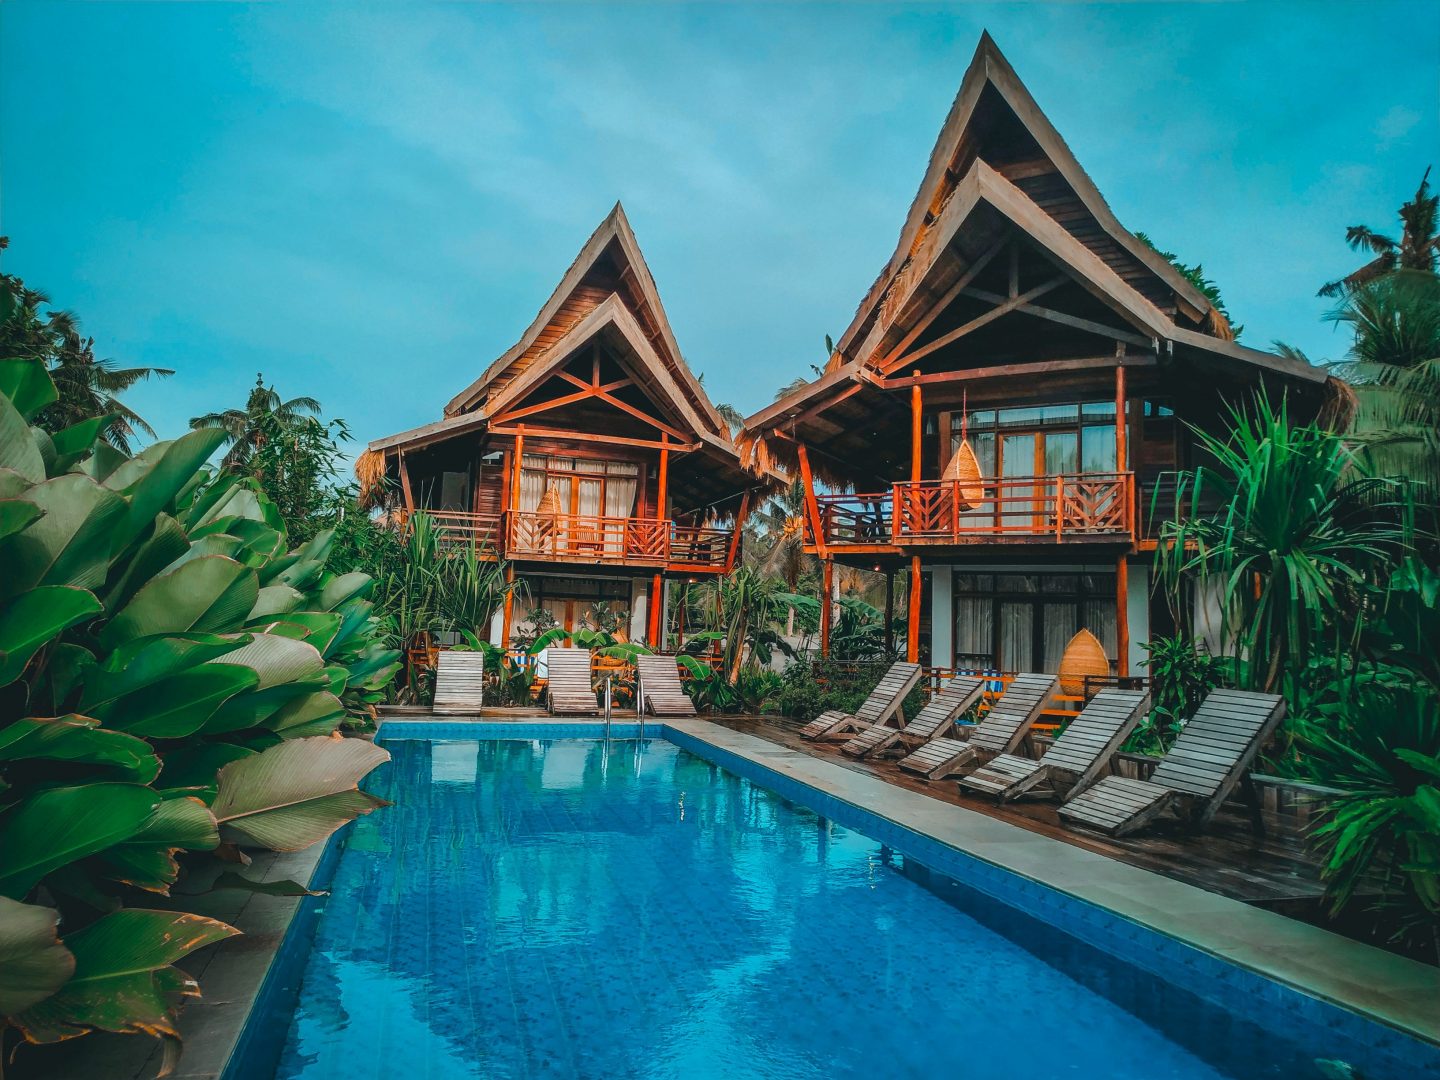 Bulan Villas Siargao: A Picturesque Accommodation in Siargao